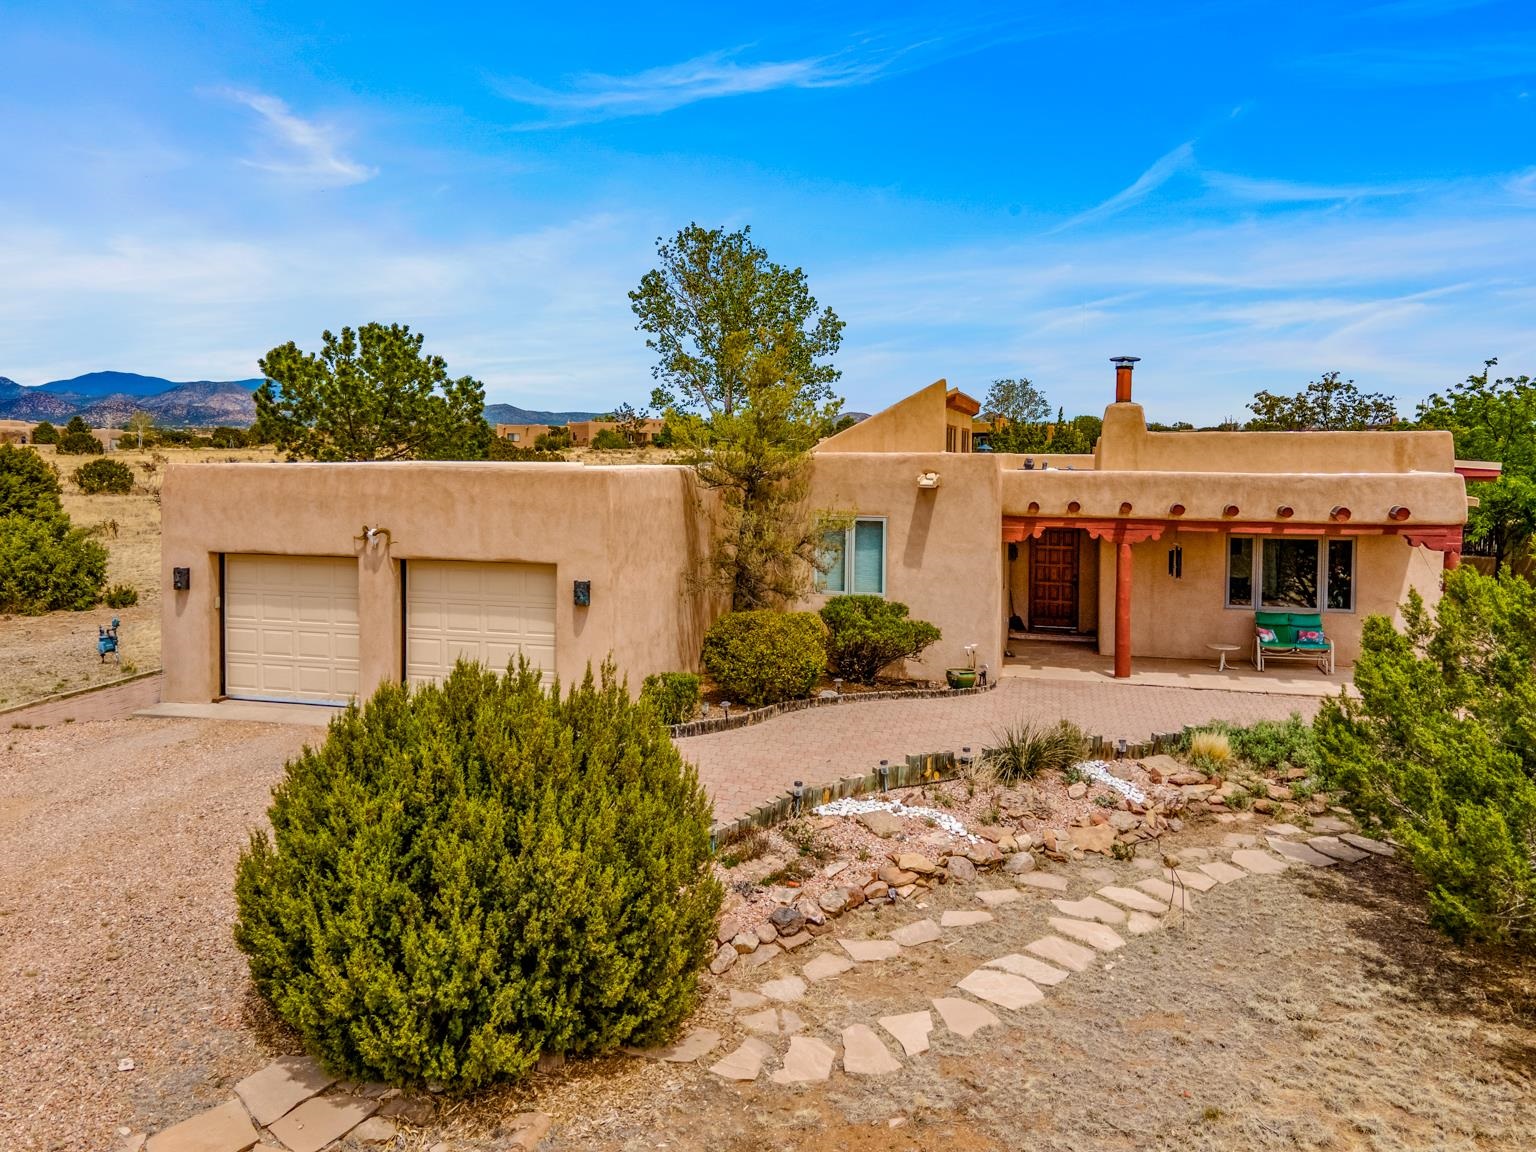 15 Dulce, Santa Fe, New Mexico 87508, 3 Bedrooms Bedrooms, ,2 BathroomsBathrooms,Residential,For Sale,15 Dulce,202201924